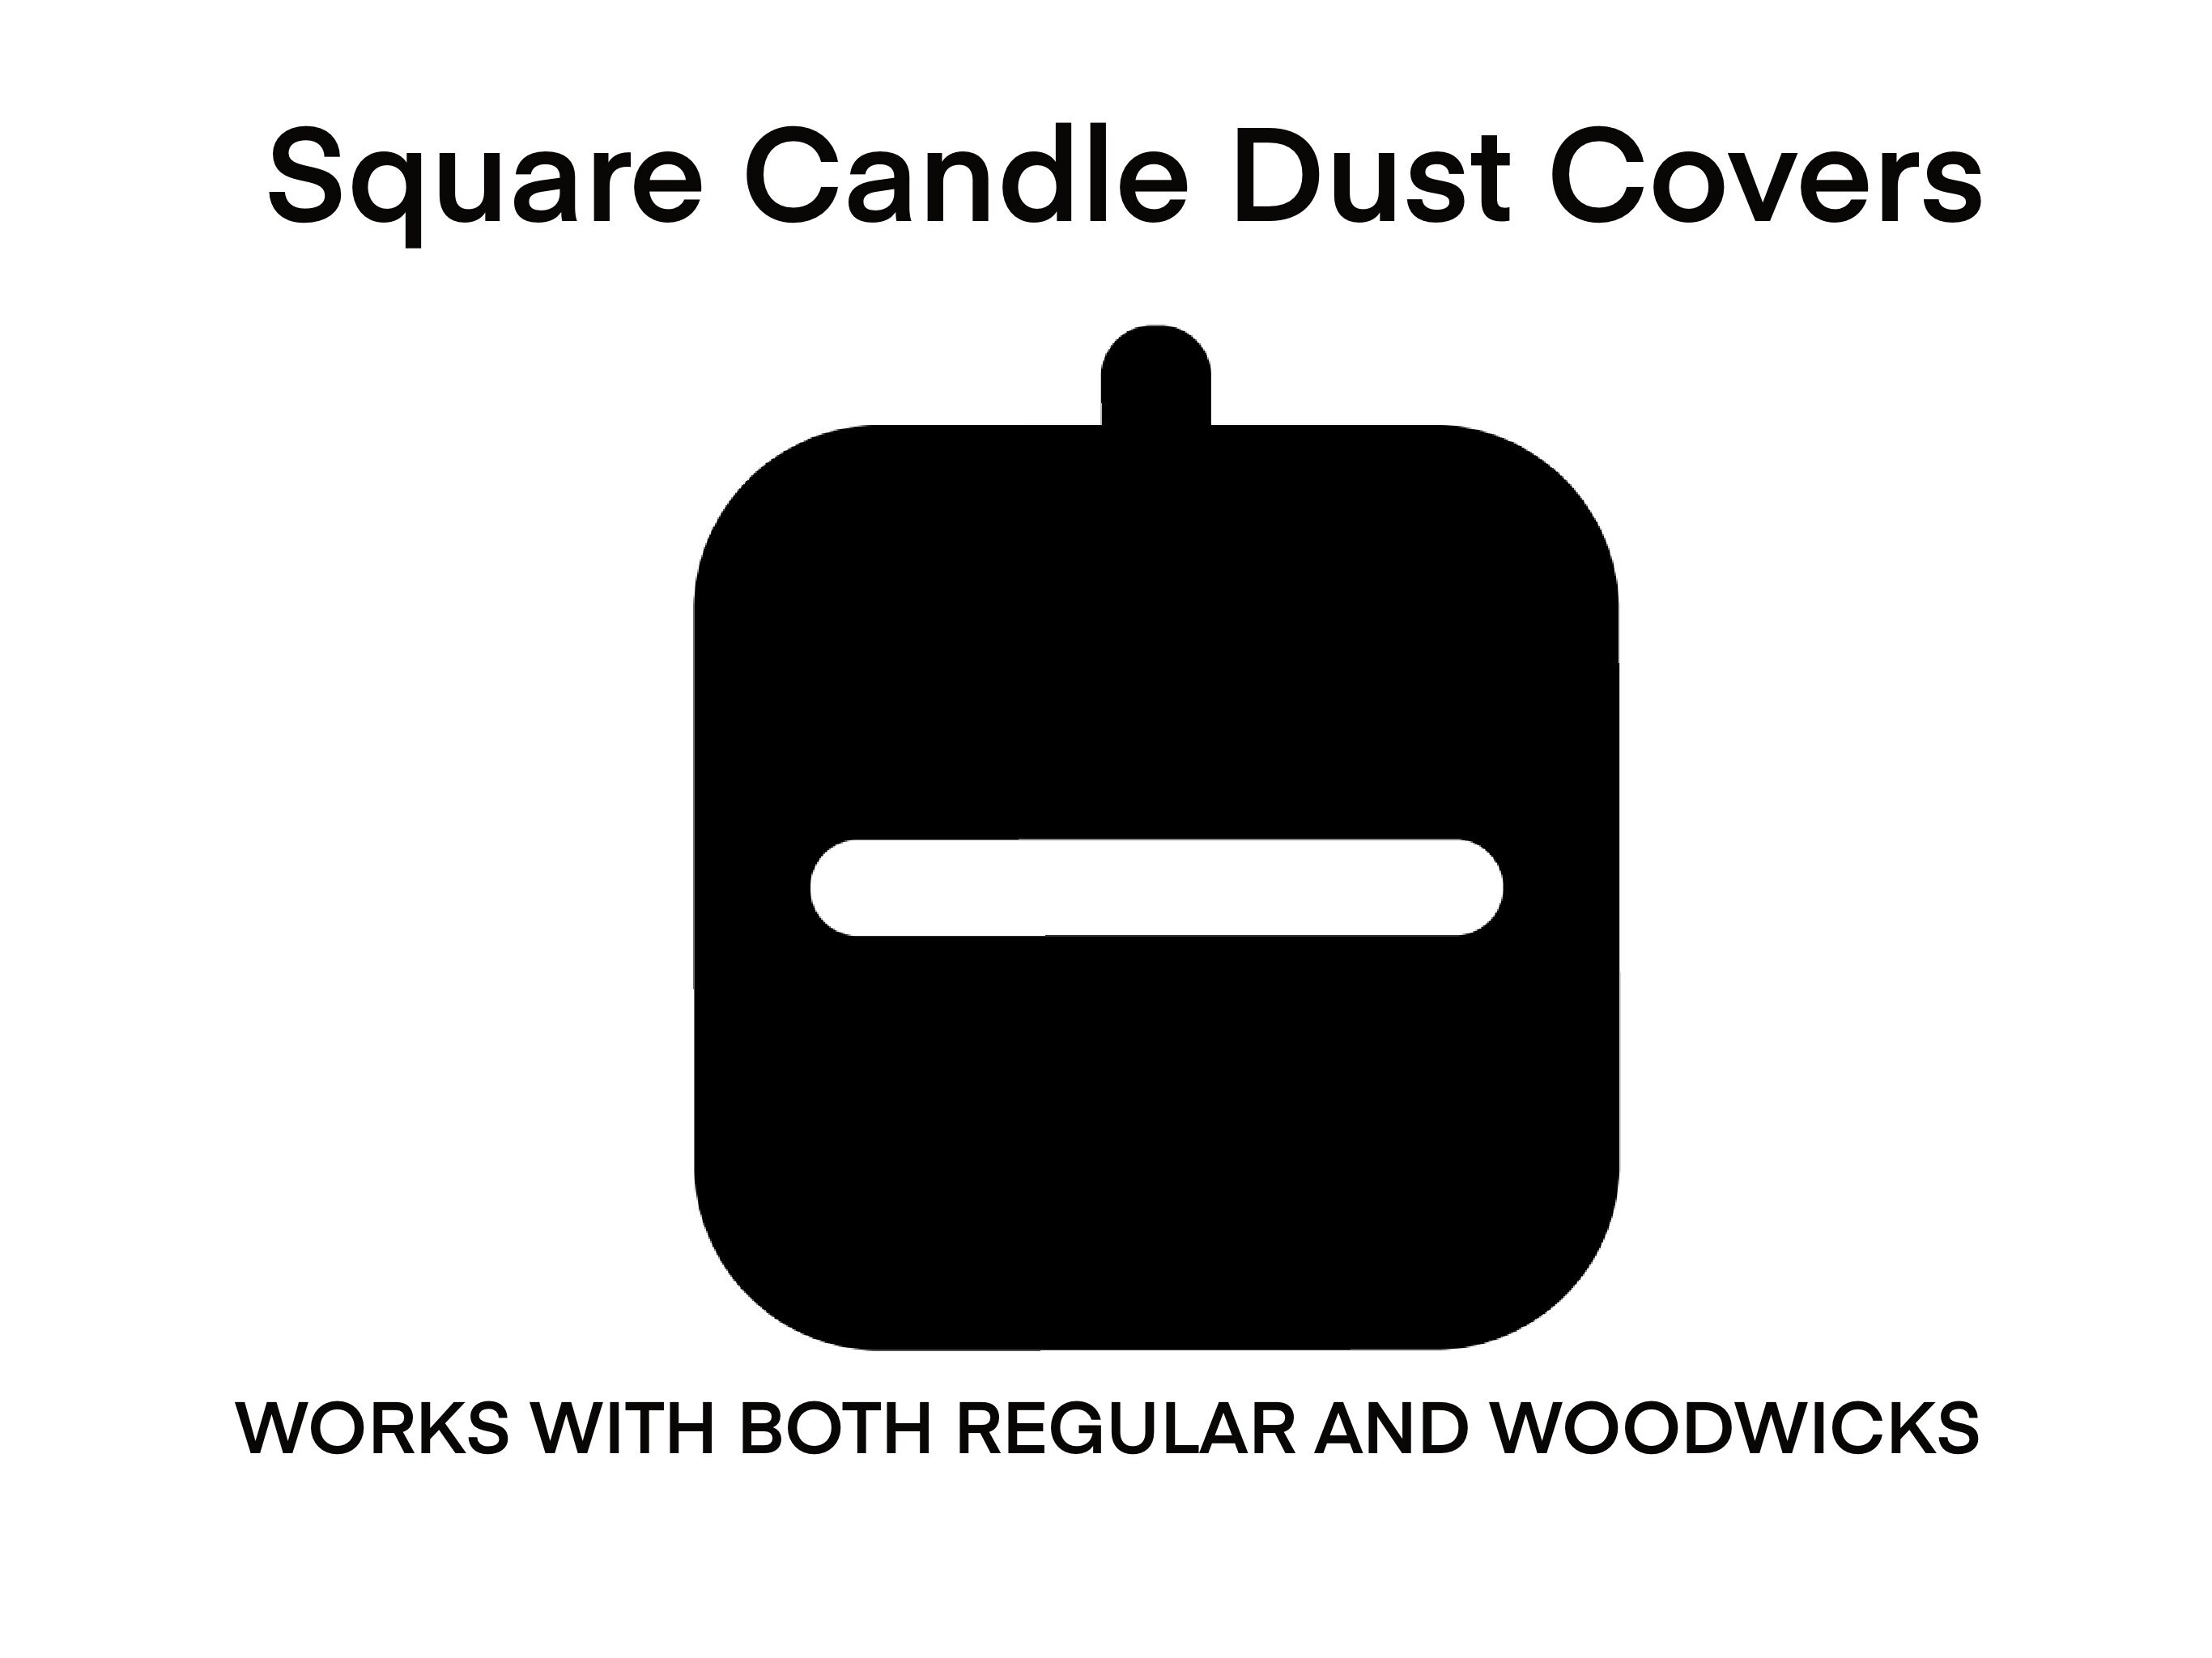 Printable Candle Dust Covers, Candles Dust Lid Template, Editable Round &  Square Candle Dust Covers, Instant Access Candle Top Lid, PW-001 